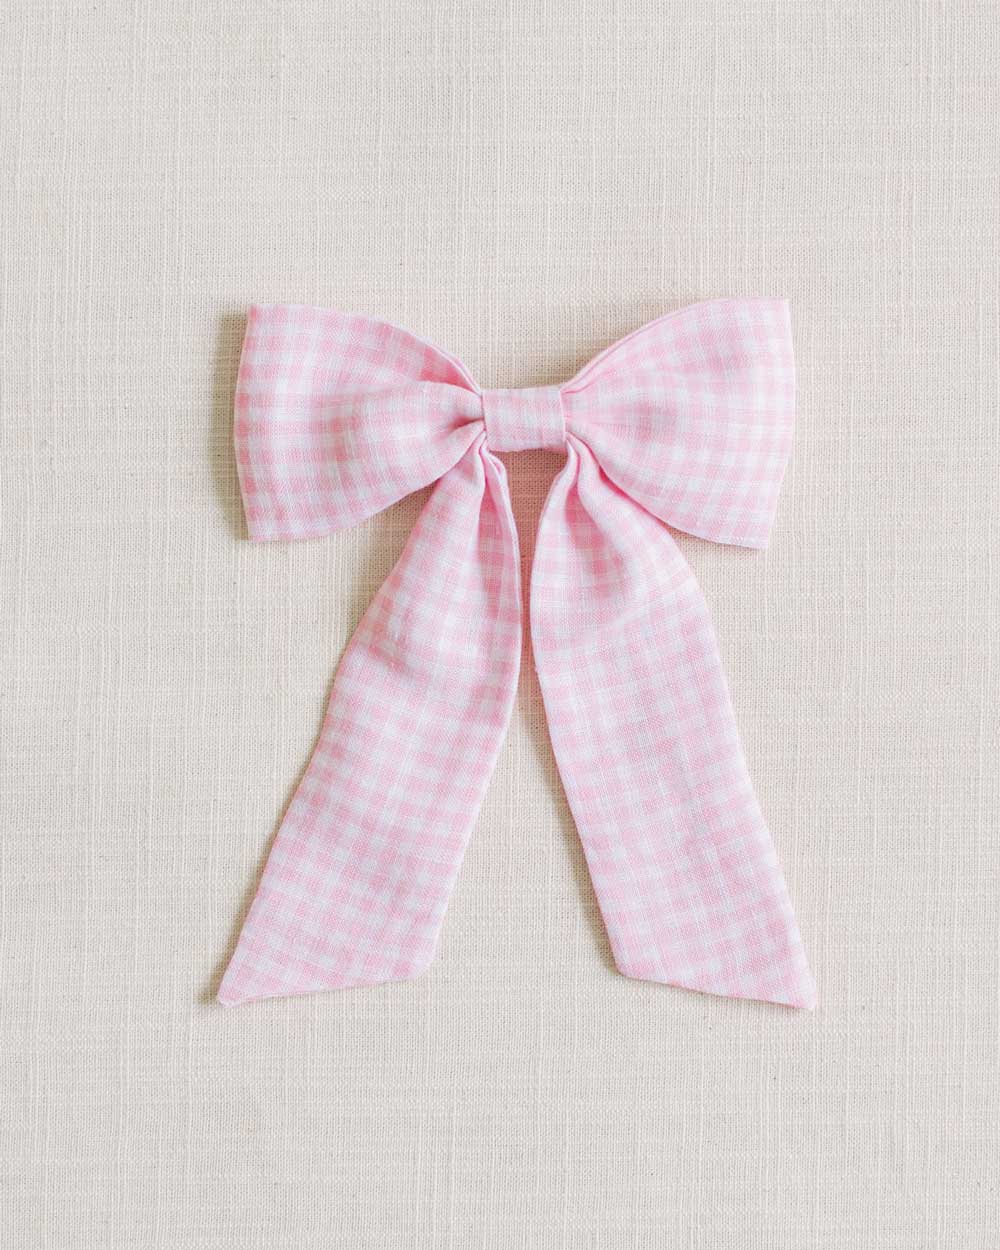 THE PINK GINGHAM CHILDREN'S BOW